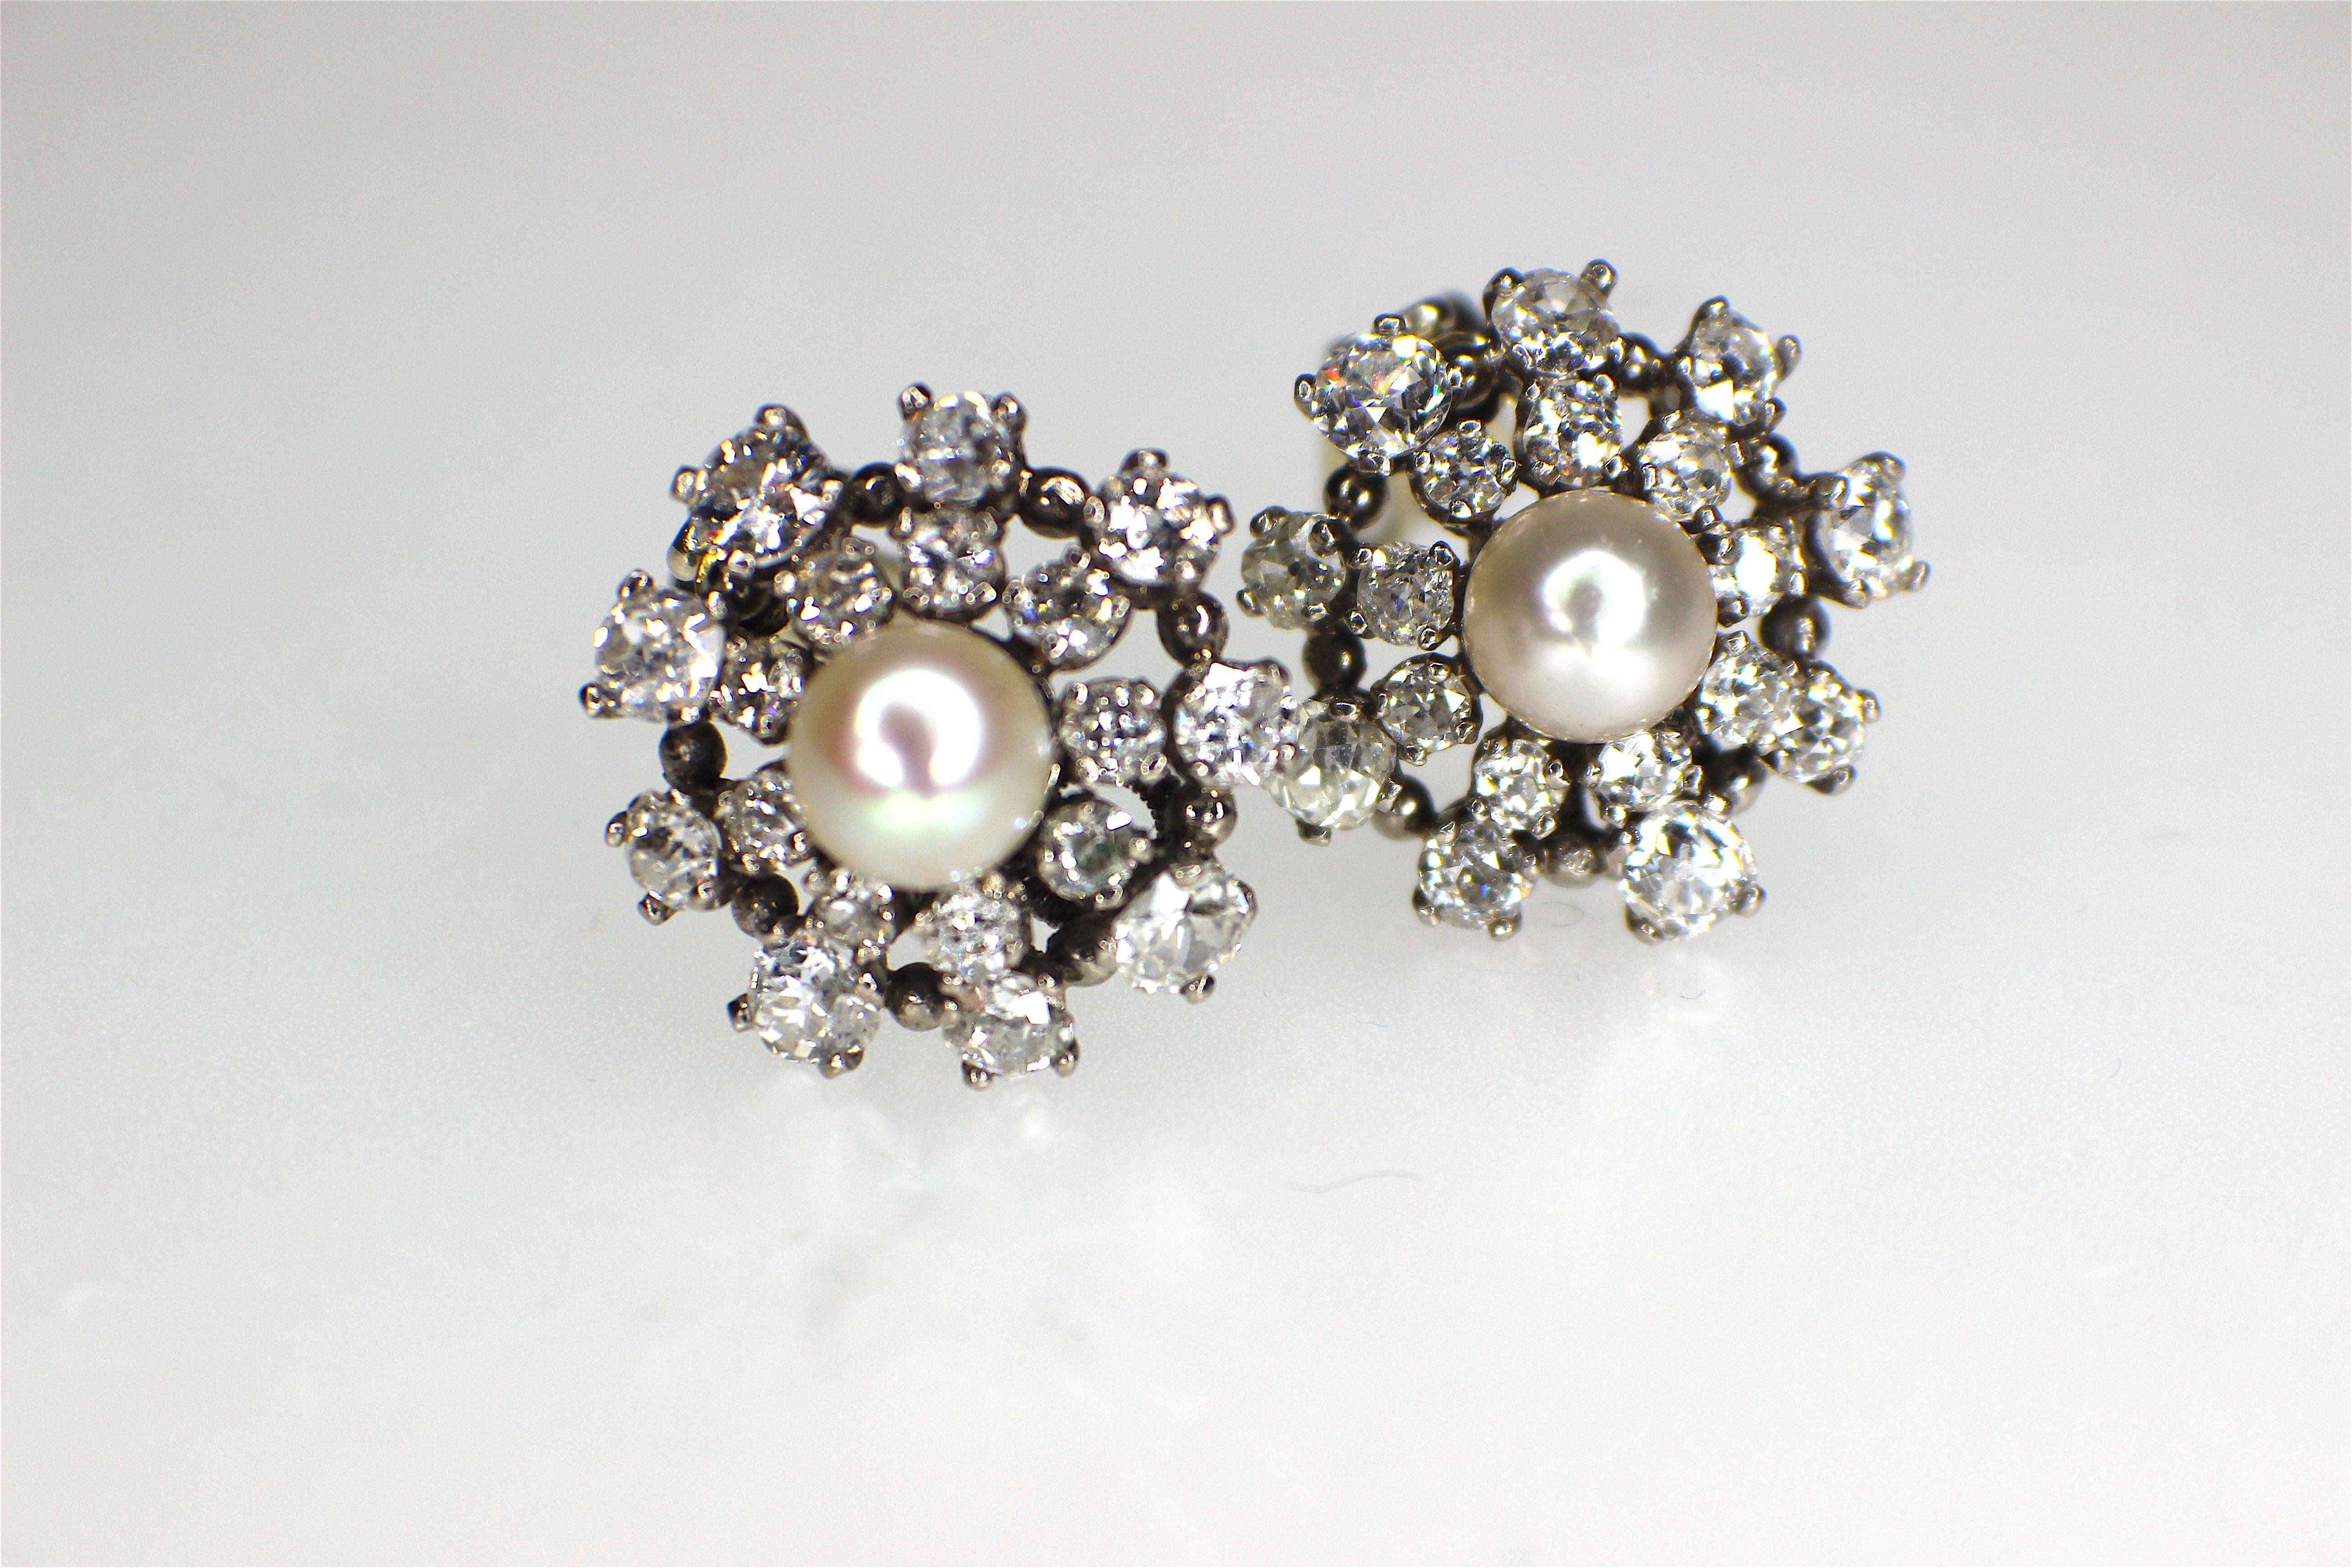 A Beautiful natural pearl and diamond pair of earrings set in platinum, circa 1950´s. Pearl report #10975, stated that the pearls are natural saltwater pearls measuring : 7.0x6.2mm and 6.8-6.9x6.2mm